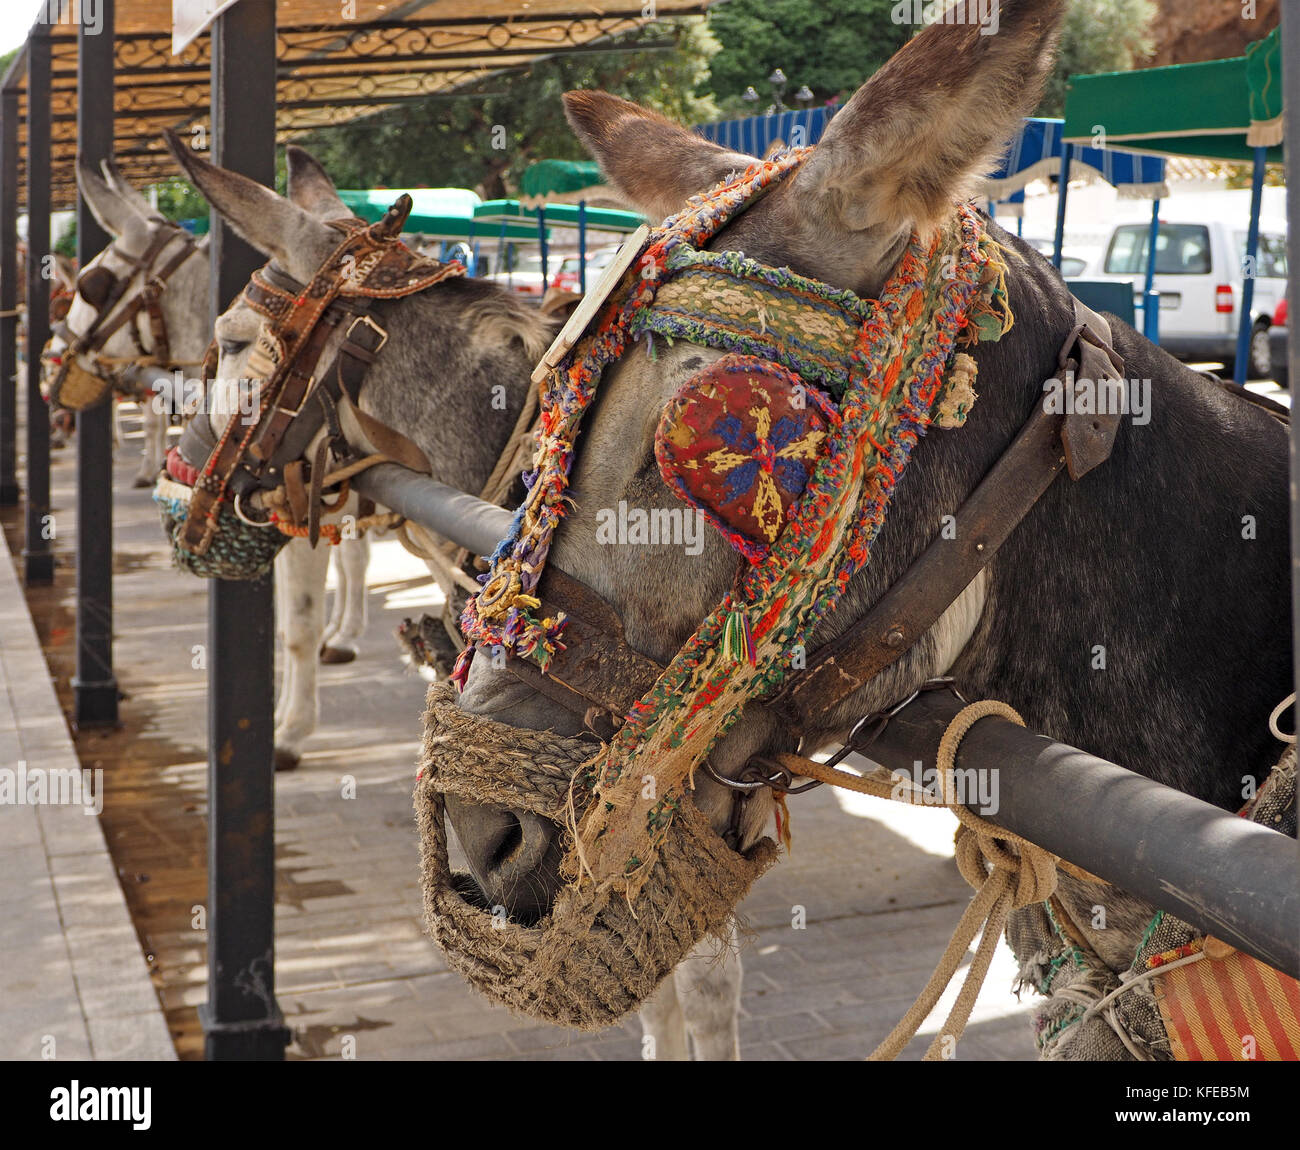 donkeys with colourful decorated harnesses tied up at the Donkey-taxi rank in Mijas, Spain Stock Photo